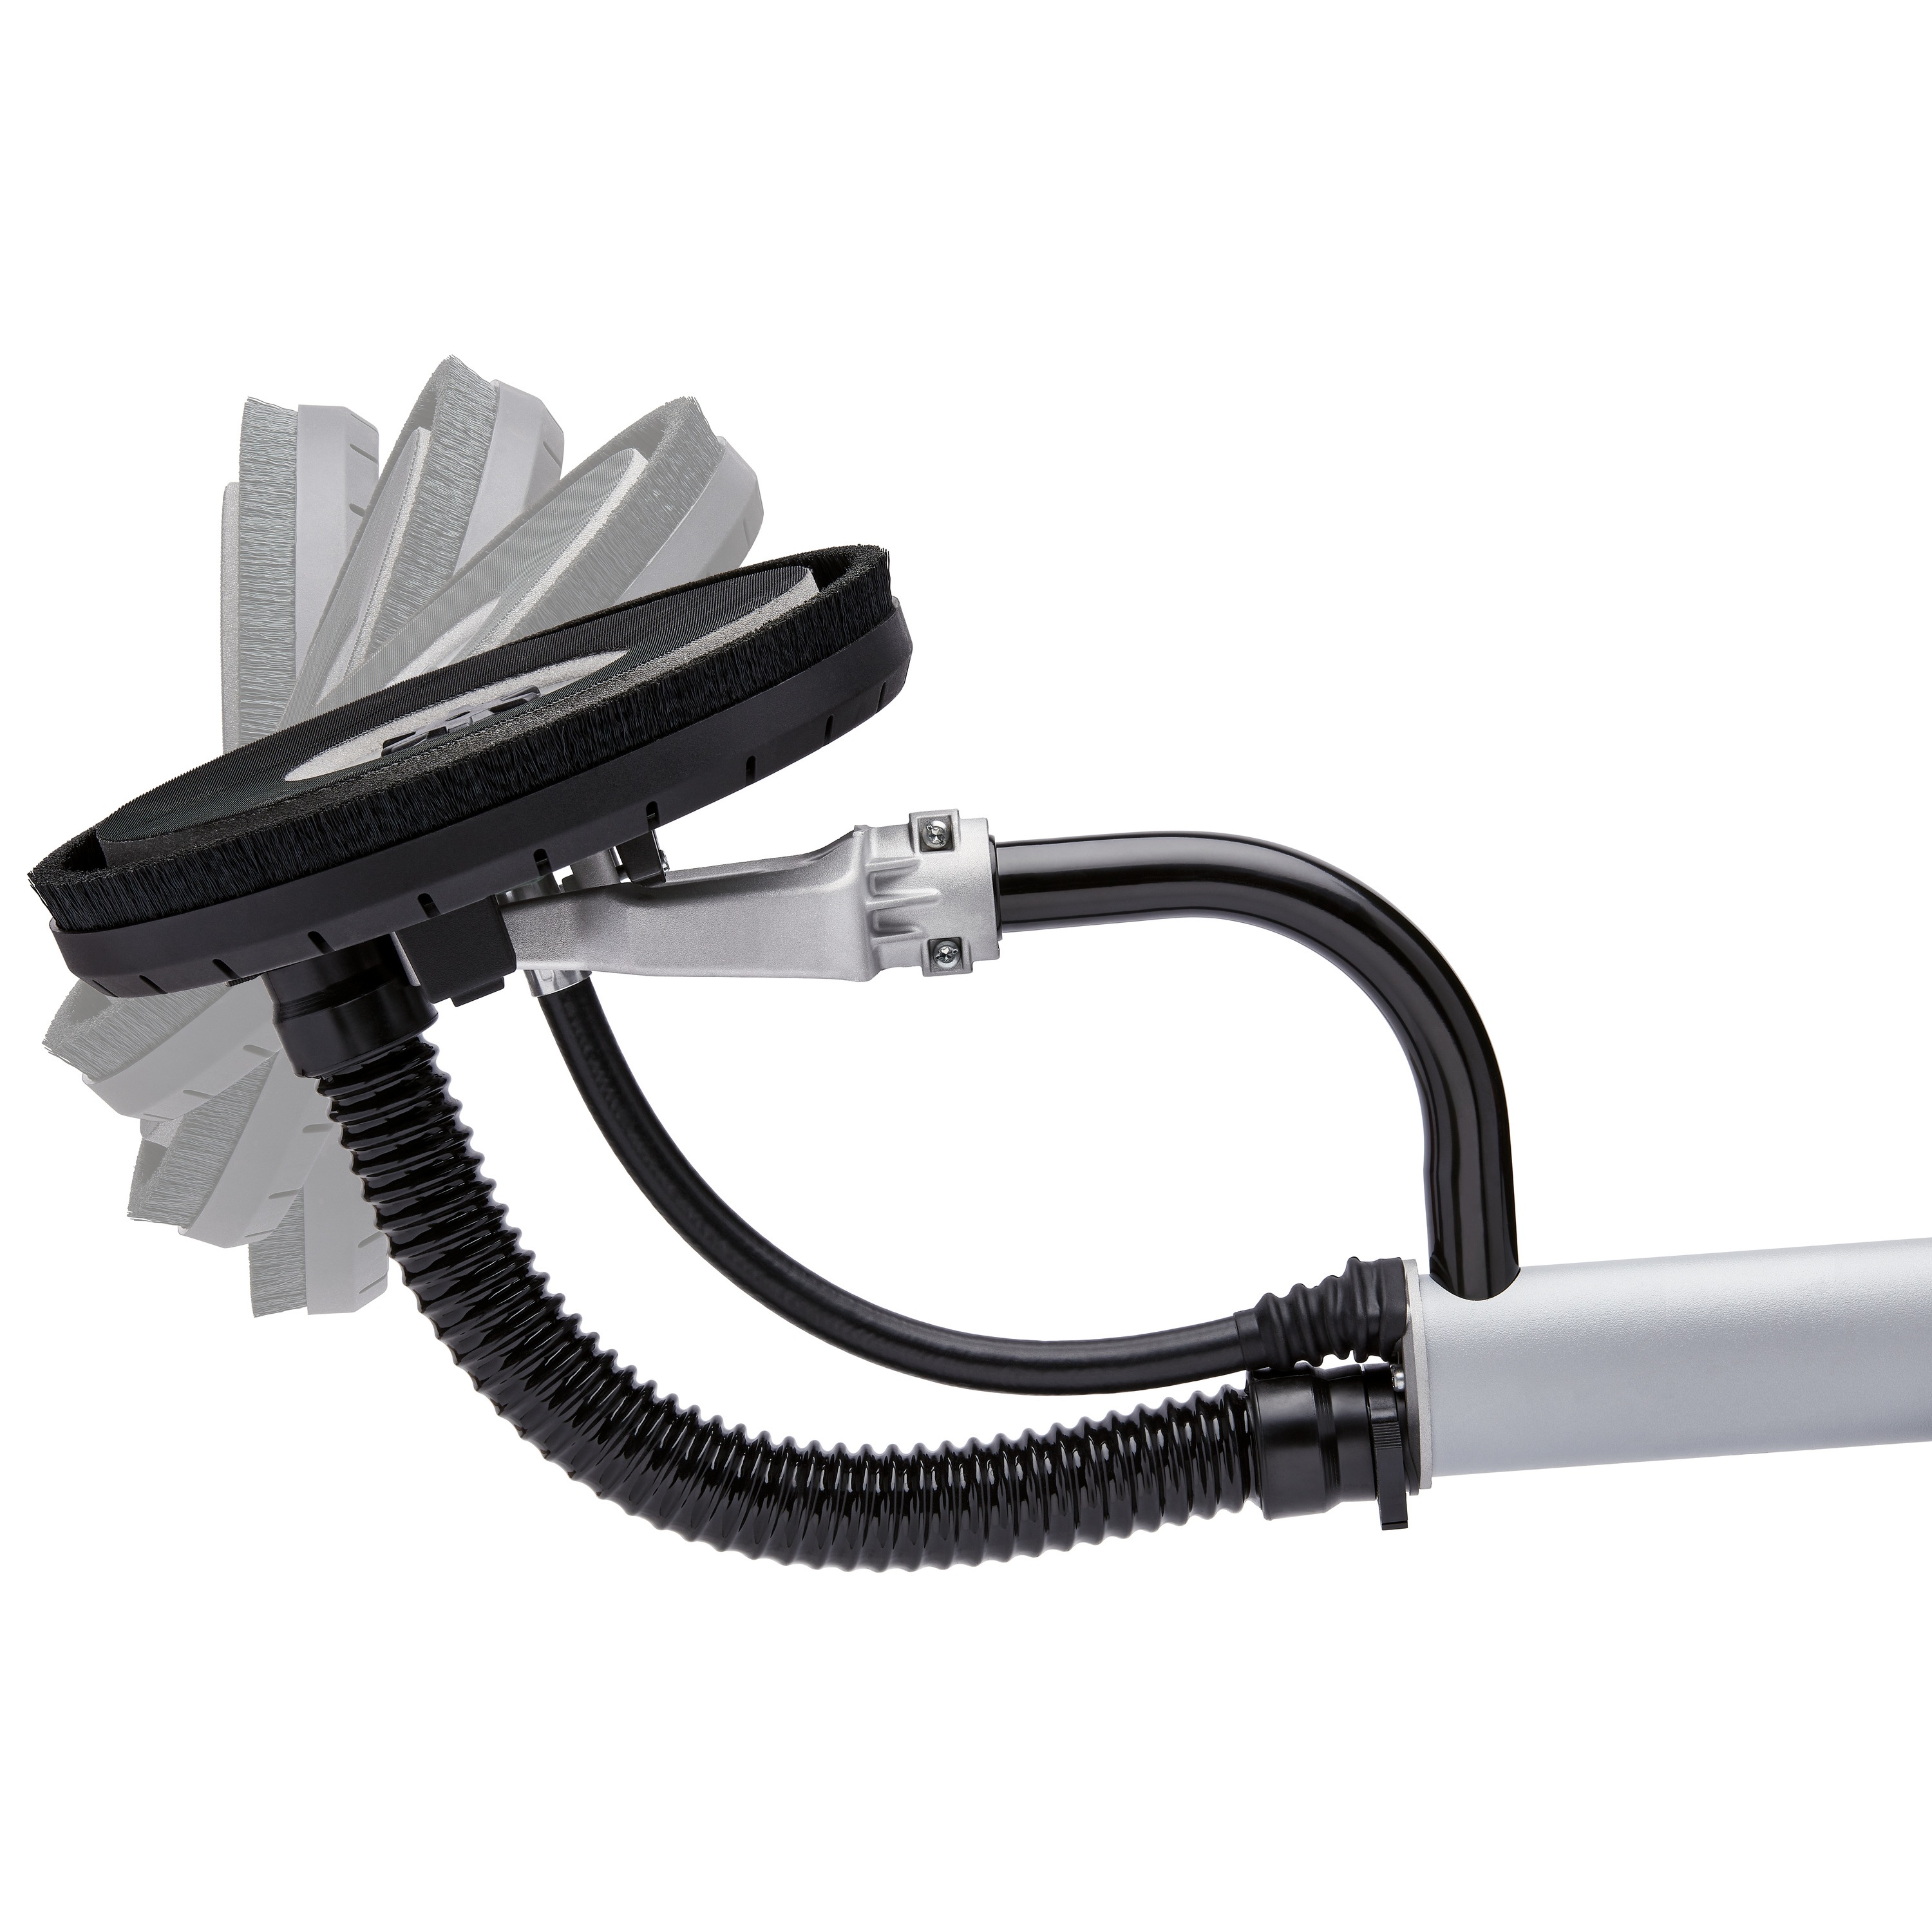 Articulating head feature of Electric drywall sander.